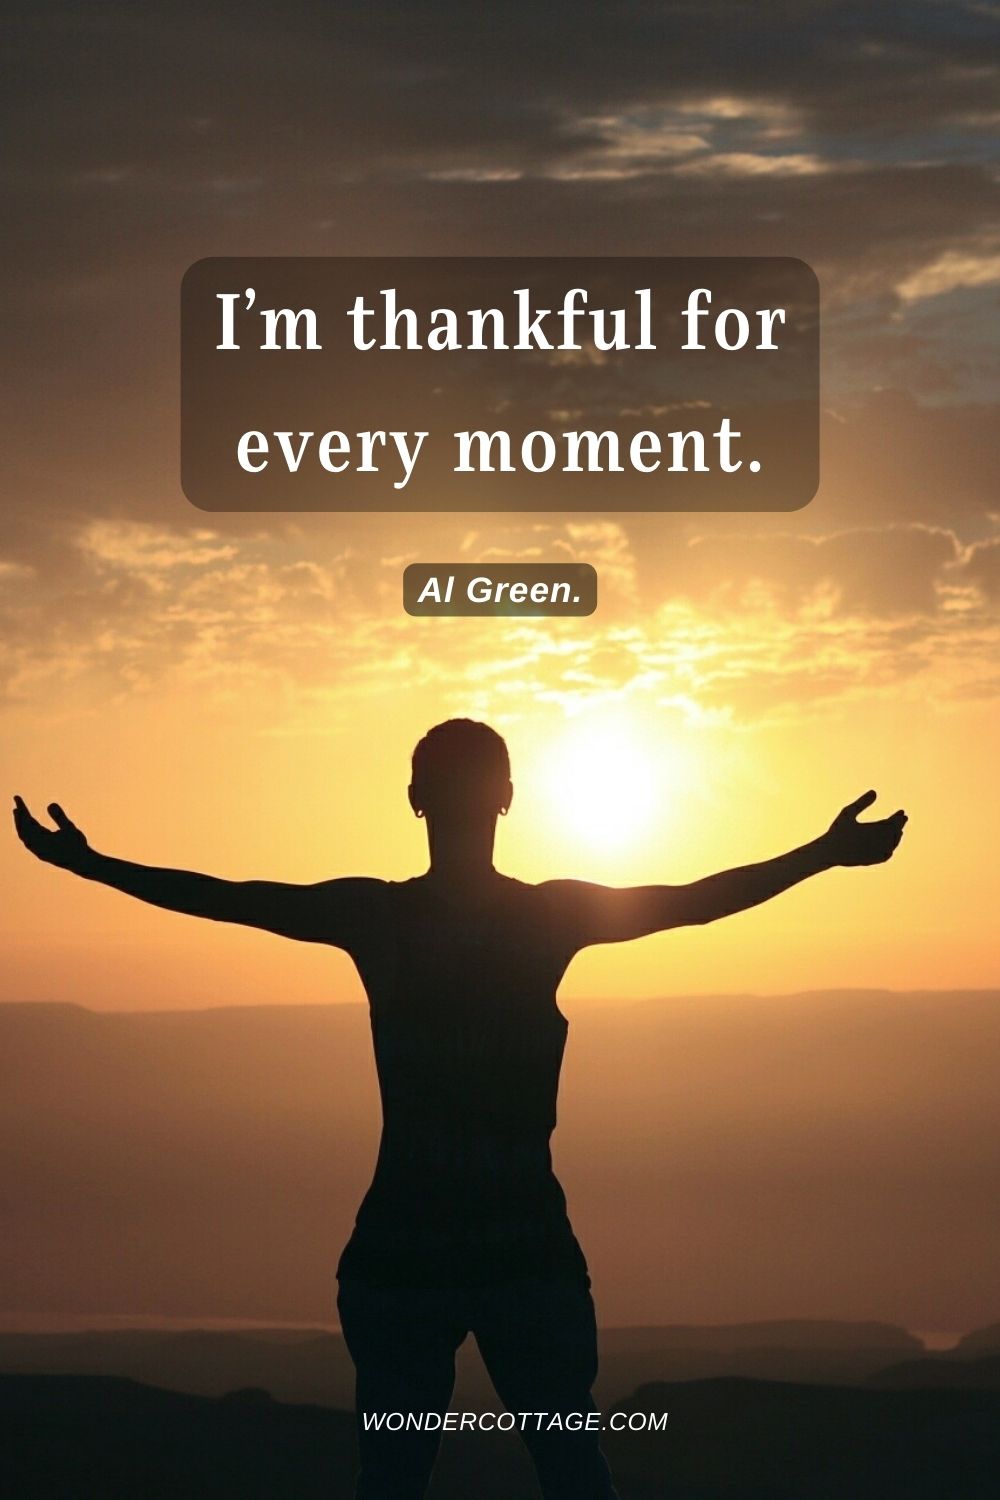 I’m thankful for every moment. Al Green.